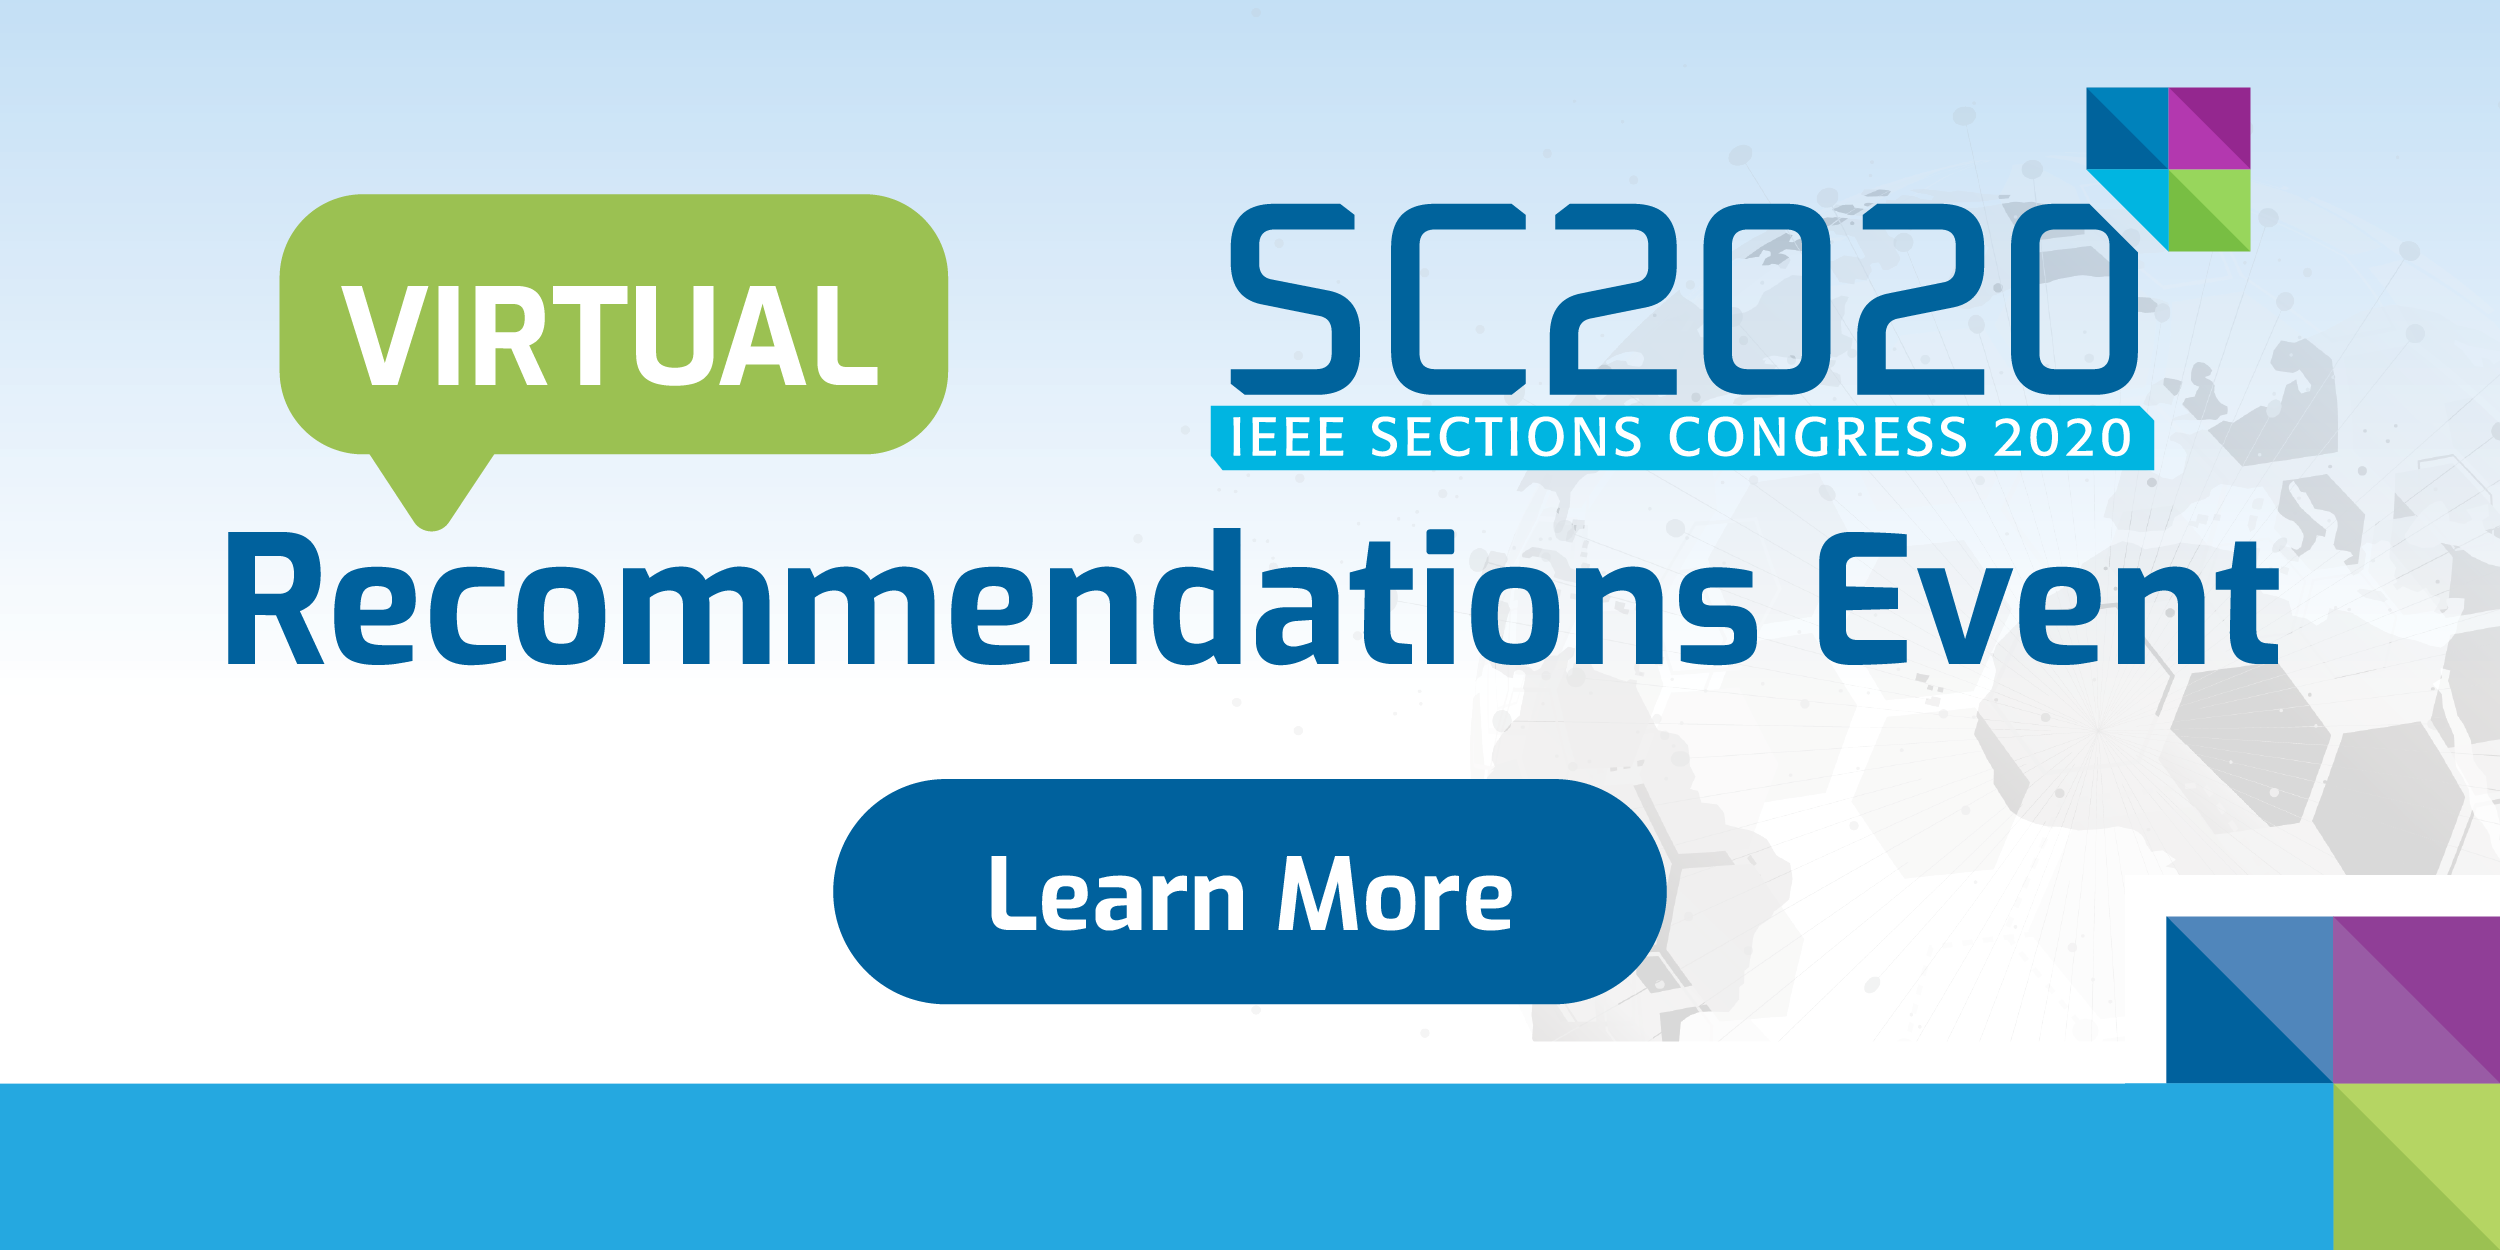 SC2020 Virtual Recommendations Event Flyer